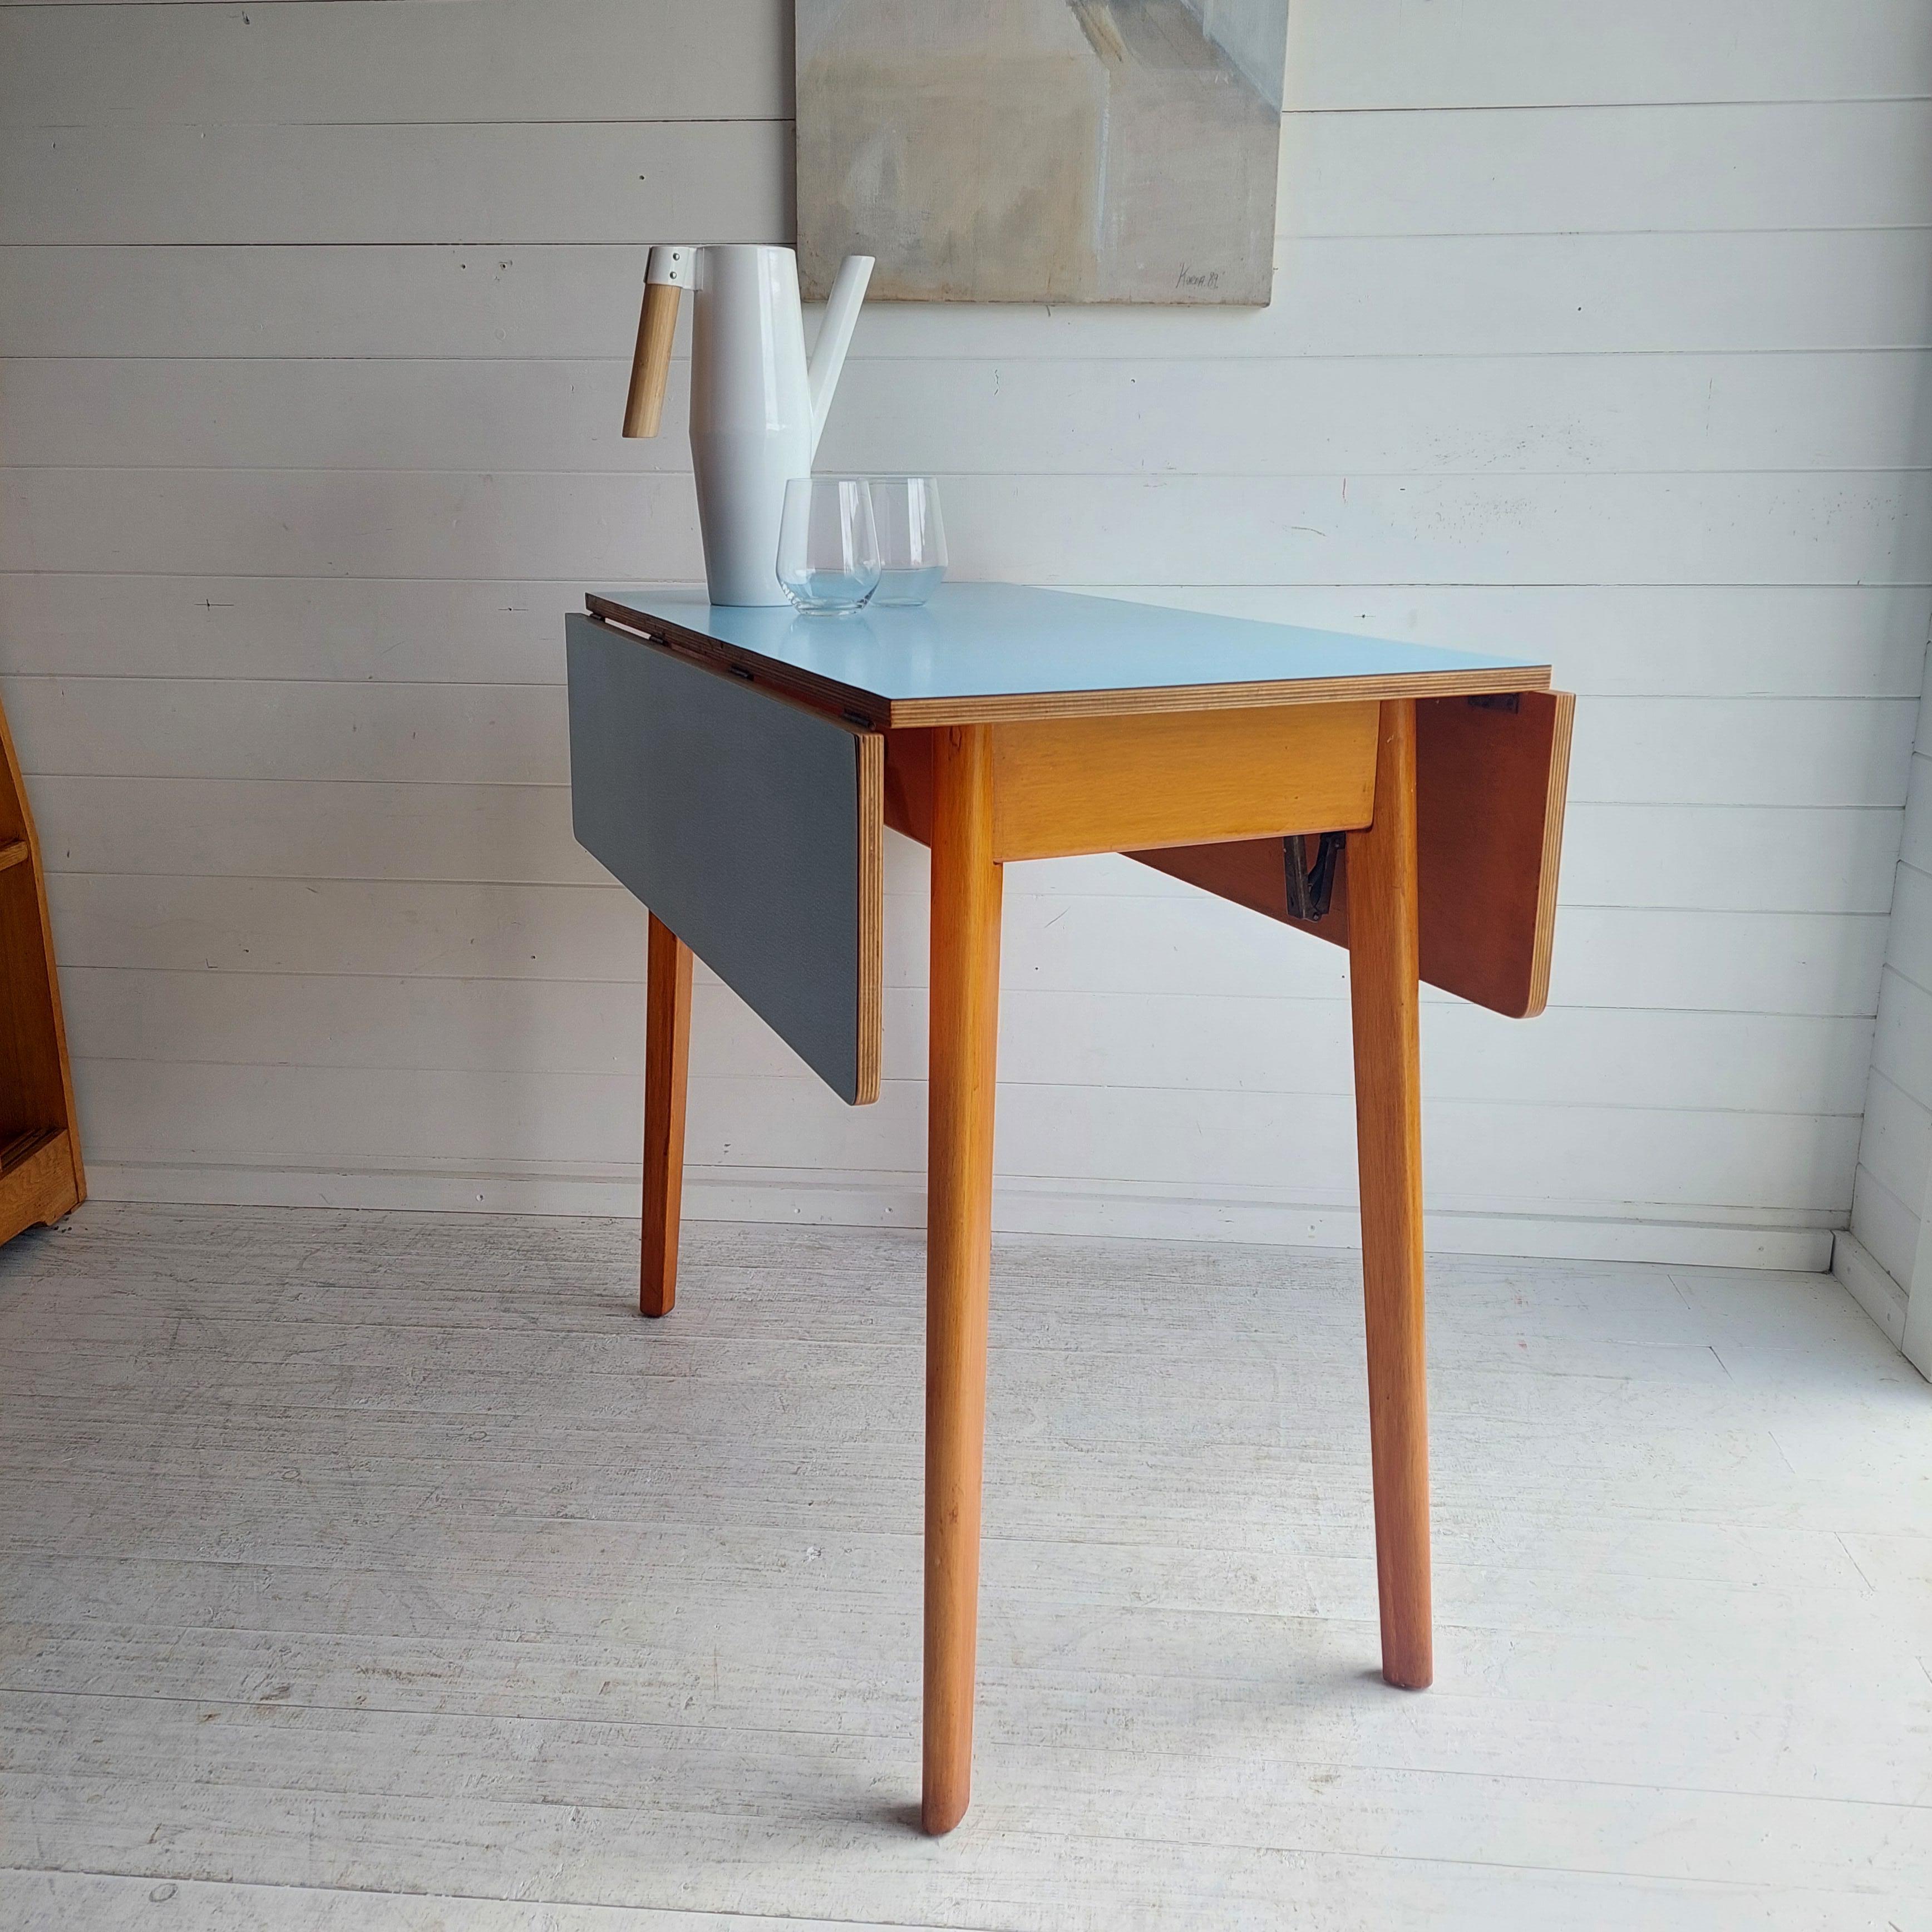 Mid-Century Modern Mid Century Blue Formica Drop Leaf Kitchen Dining Table With Wooden Legs 60s